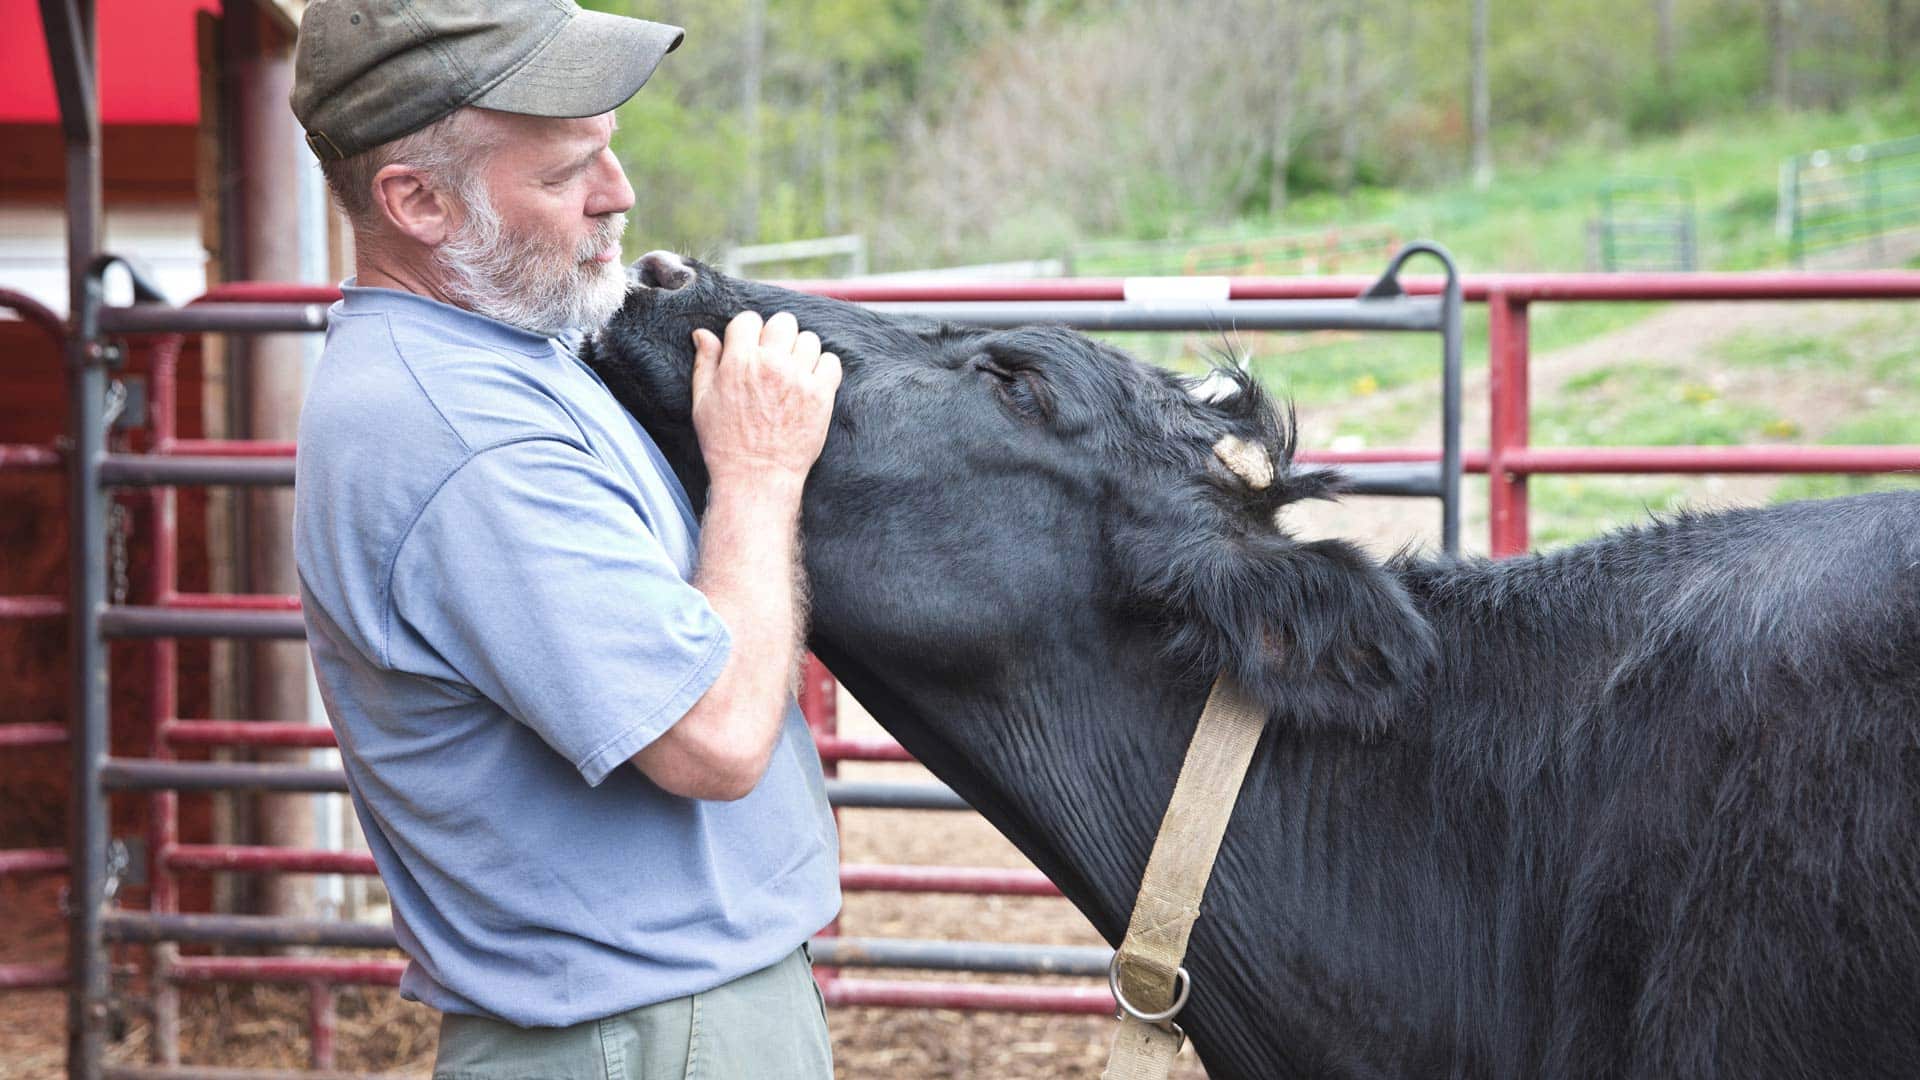 A farmer pets a black cow in a pasture.